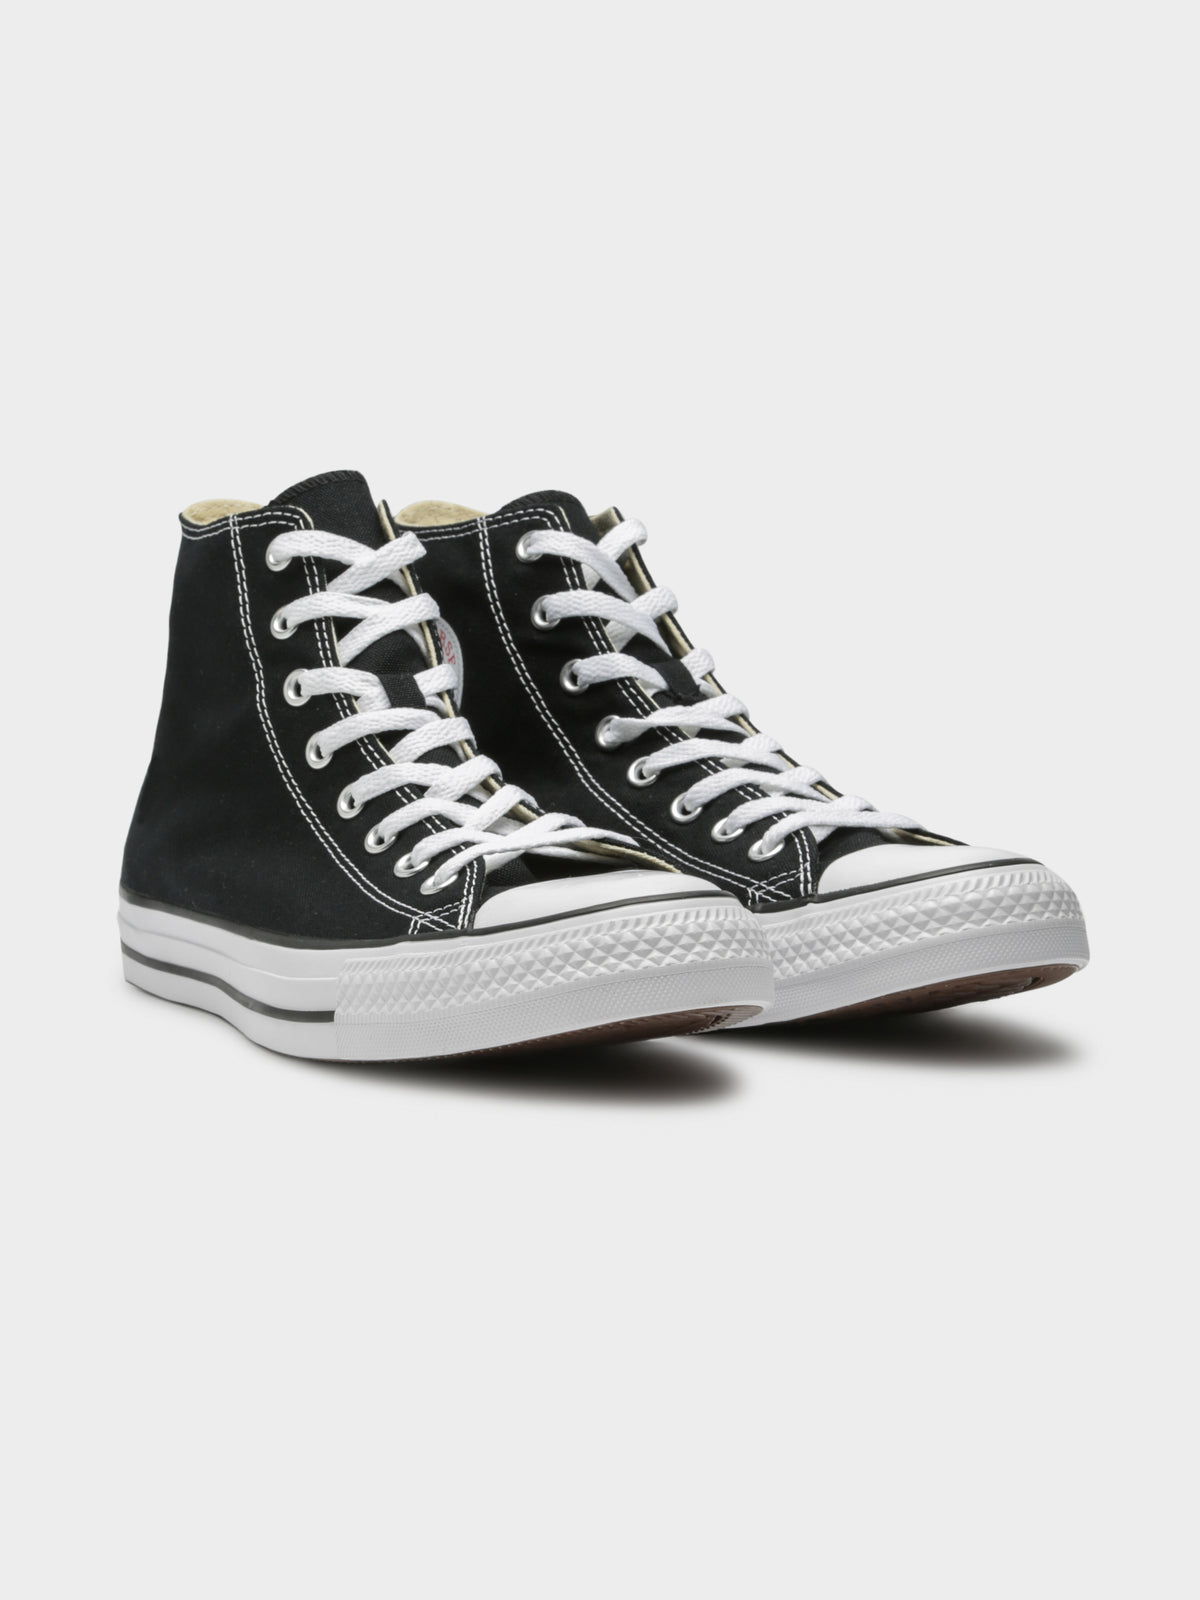 Unisex Chuck Taylor All Star High Top Sneakers in Black